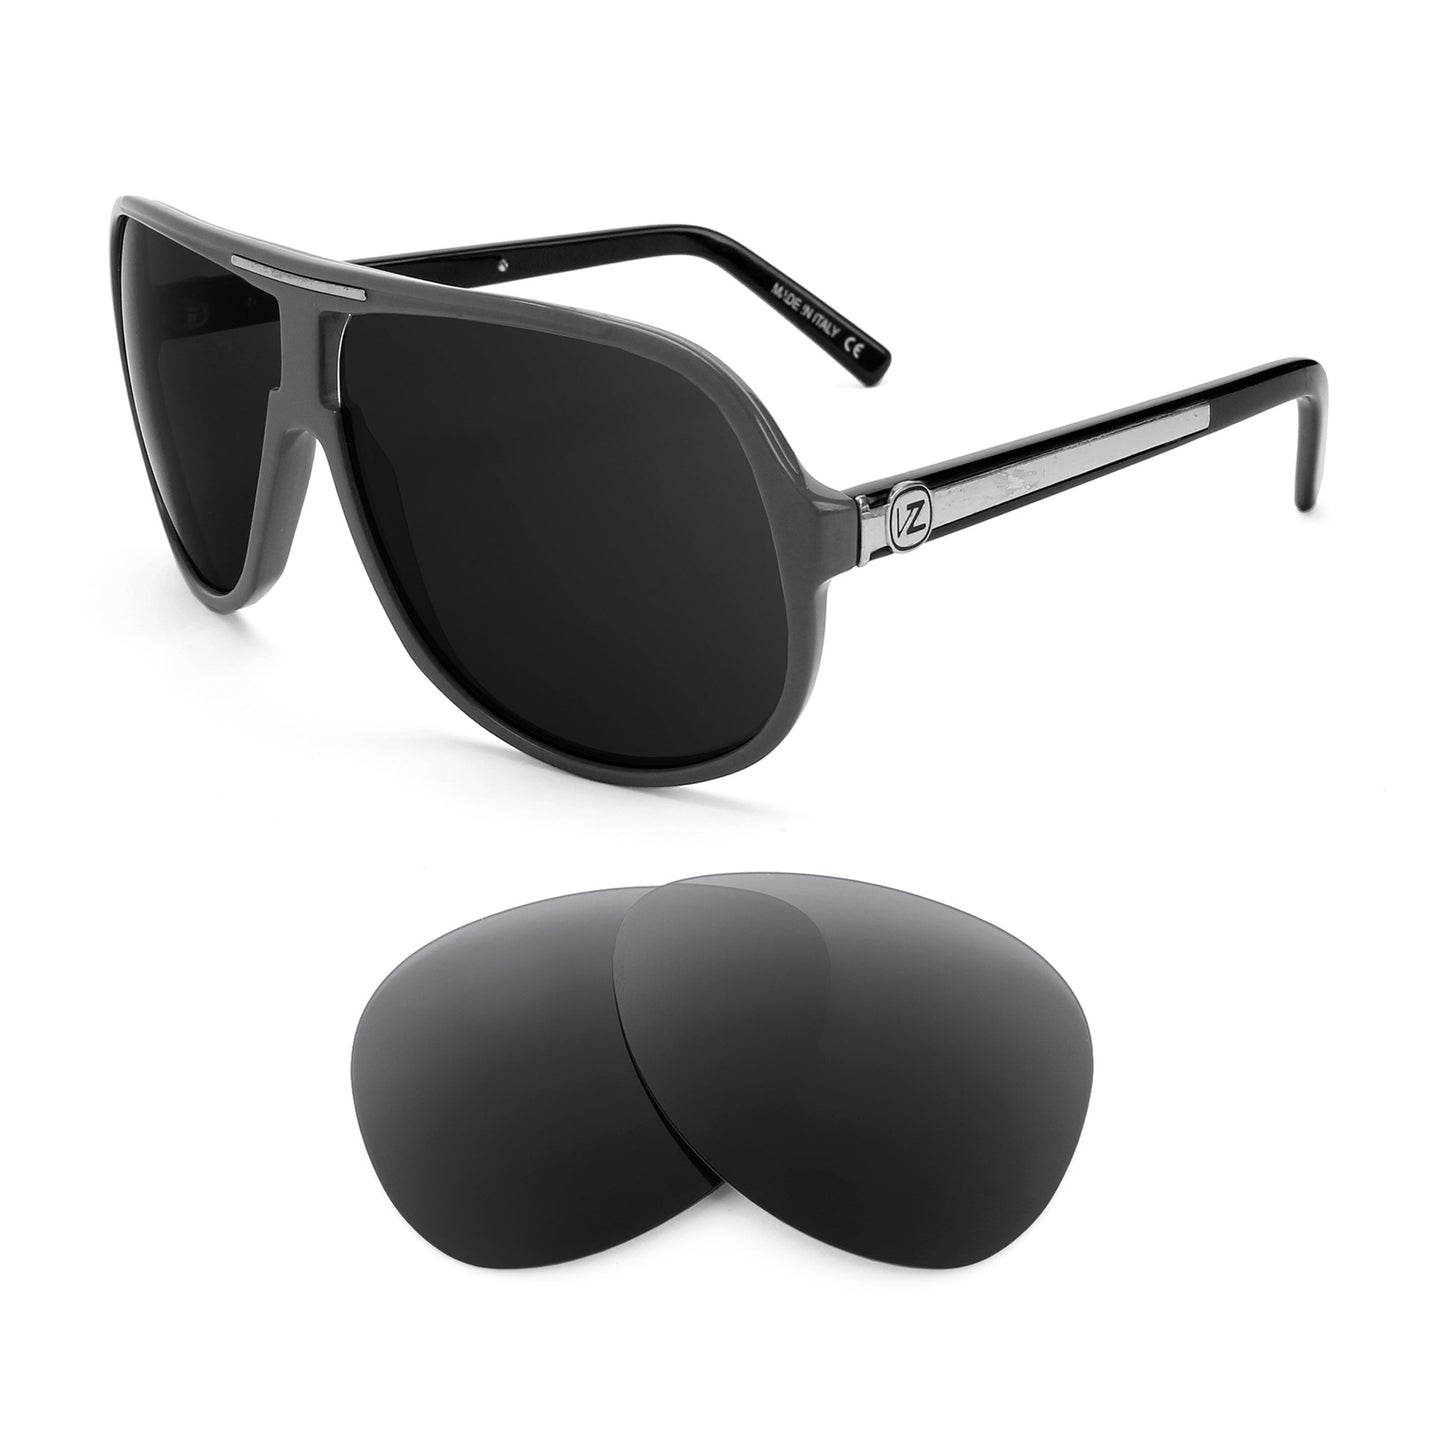 VonZipper Hoss sunglasses with replacement lenses